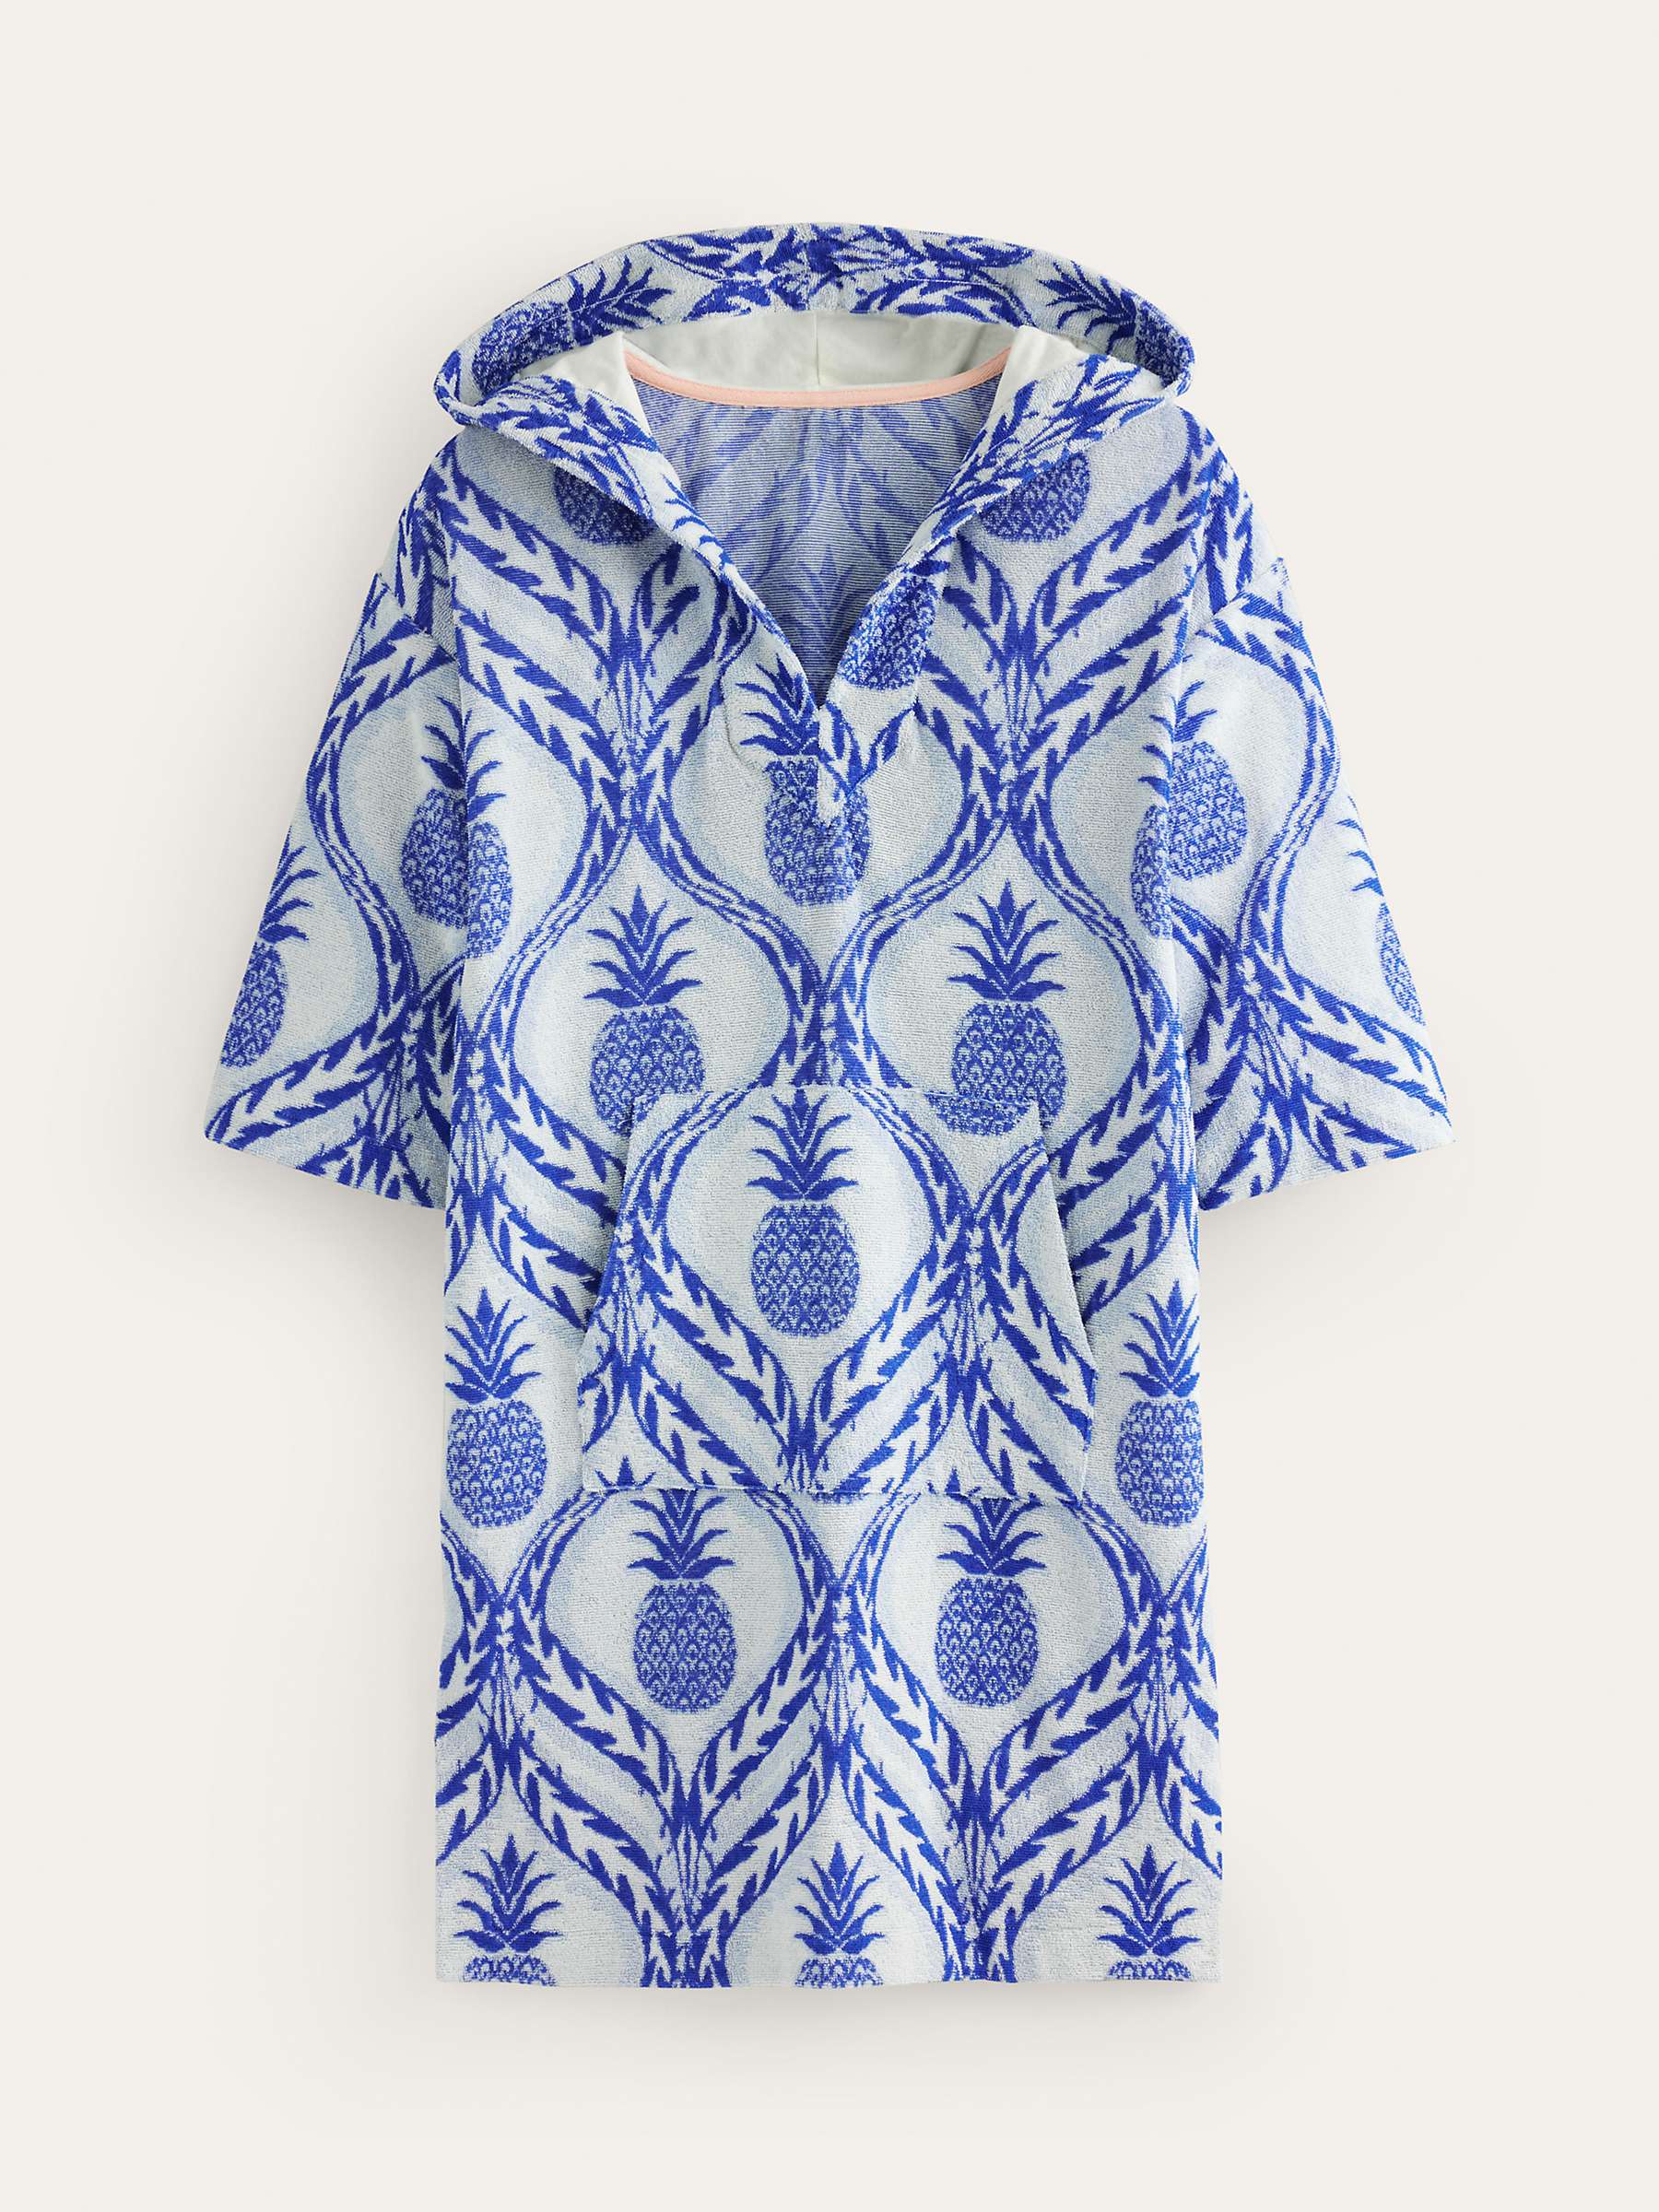 Buy Boden Pineapples Hooded Towelling Dress, Blue Online at johnlewis.com